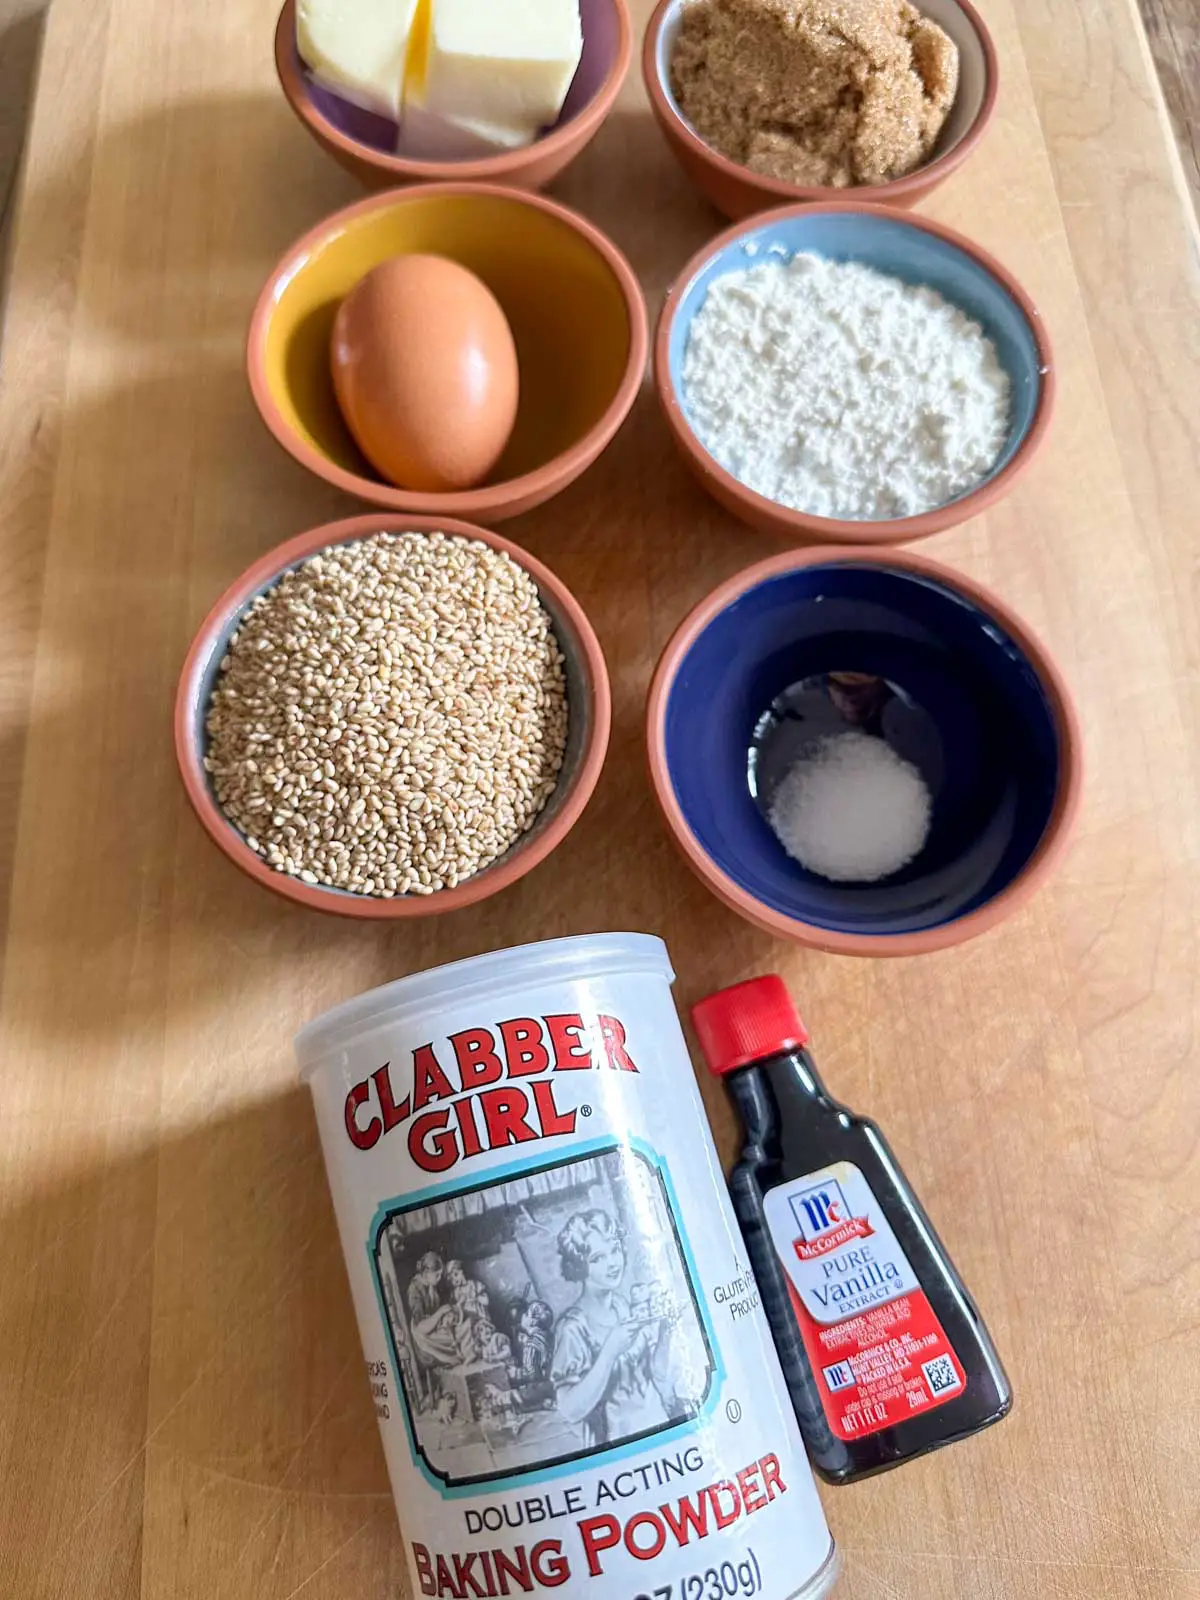 Small bowls containing butter, light brown sugar, an egg, flour, sesame seeds, salt, a can of Clabber Girl Baking Powder, and a small bottle of Vanilla Extract.